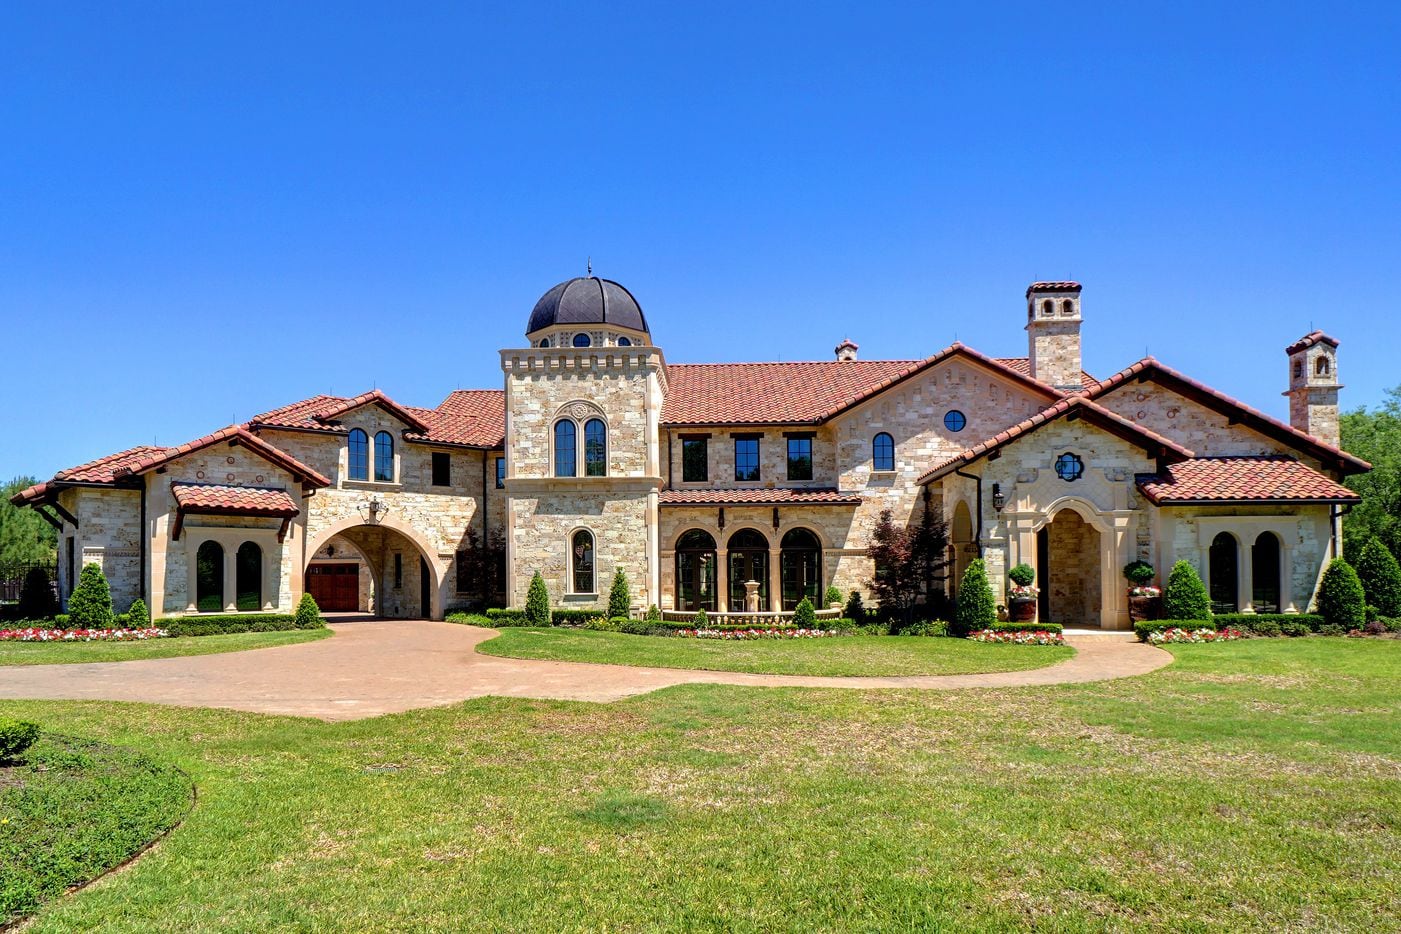 A look at the exterior of 5513 Montclair Drive in Colleyville, TX.